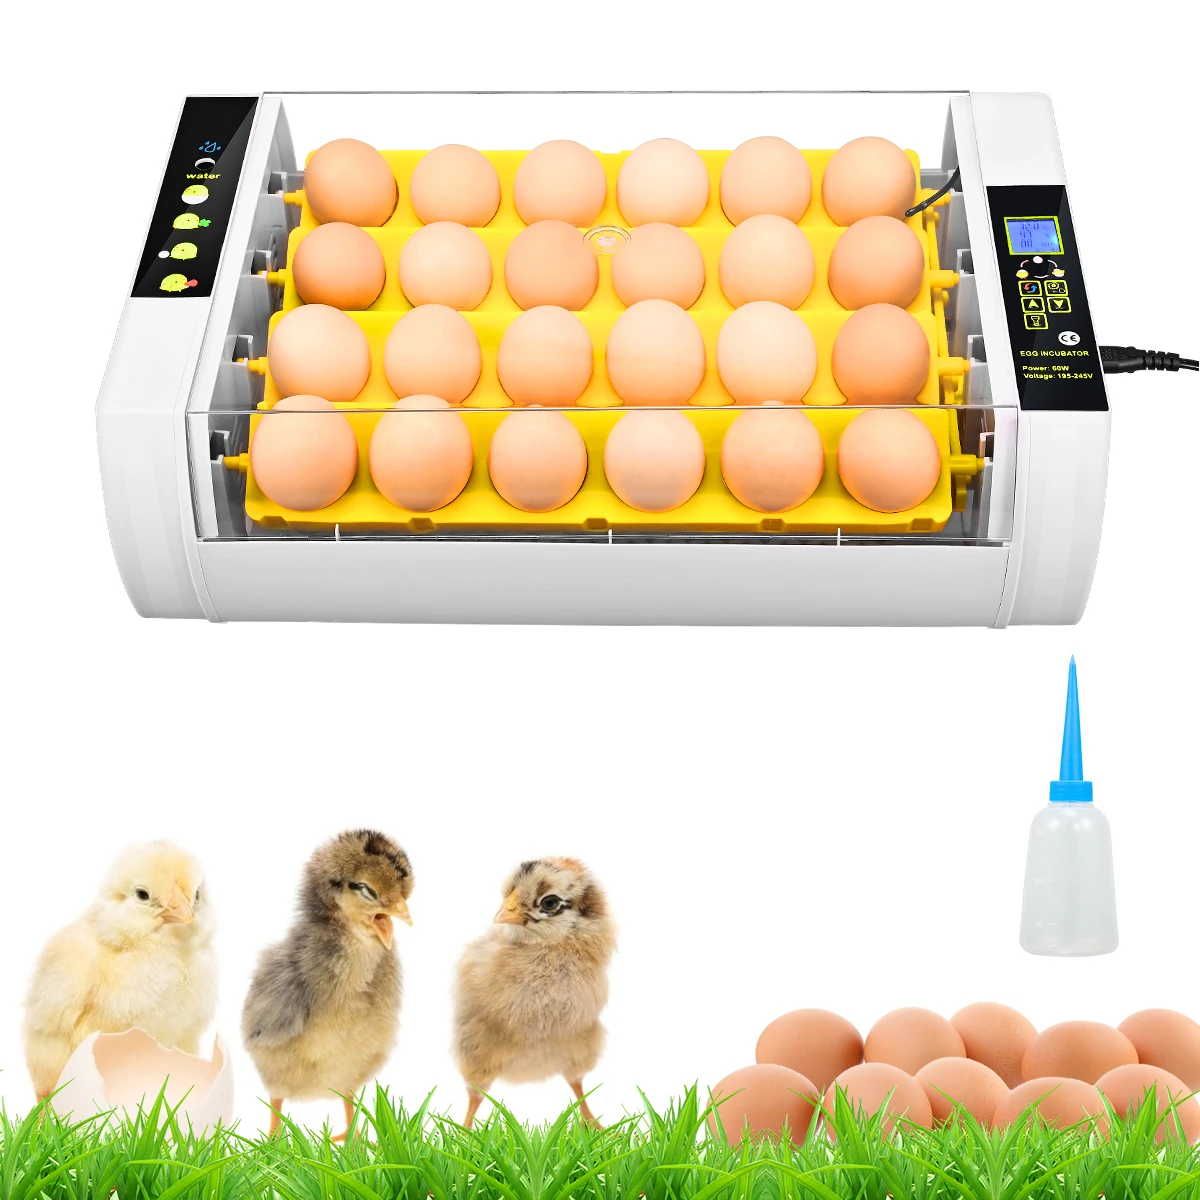 

24s Egg Incubator Full Automatic LED Egg Incubator Digital Control Hatchery Machine Chicken Brooder For Poultry Quail Duck